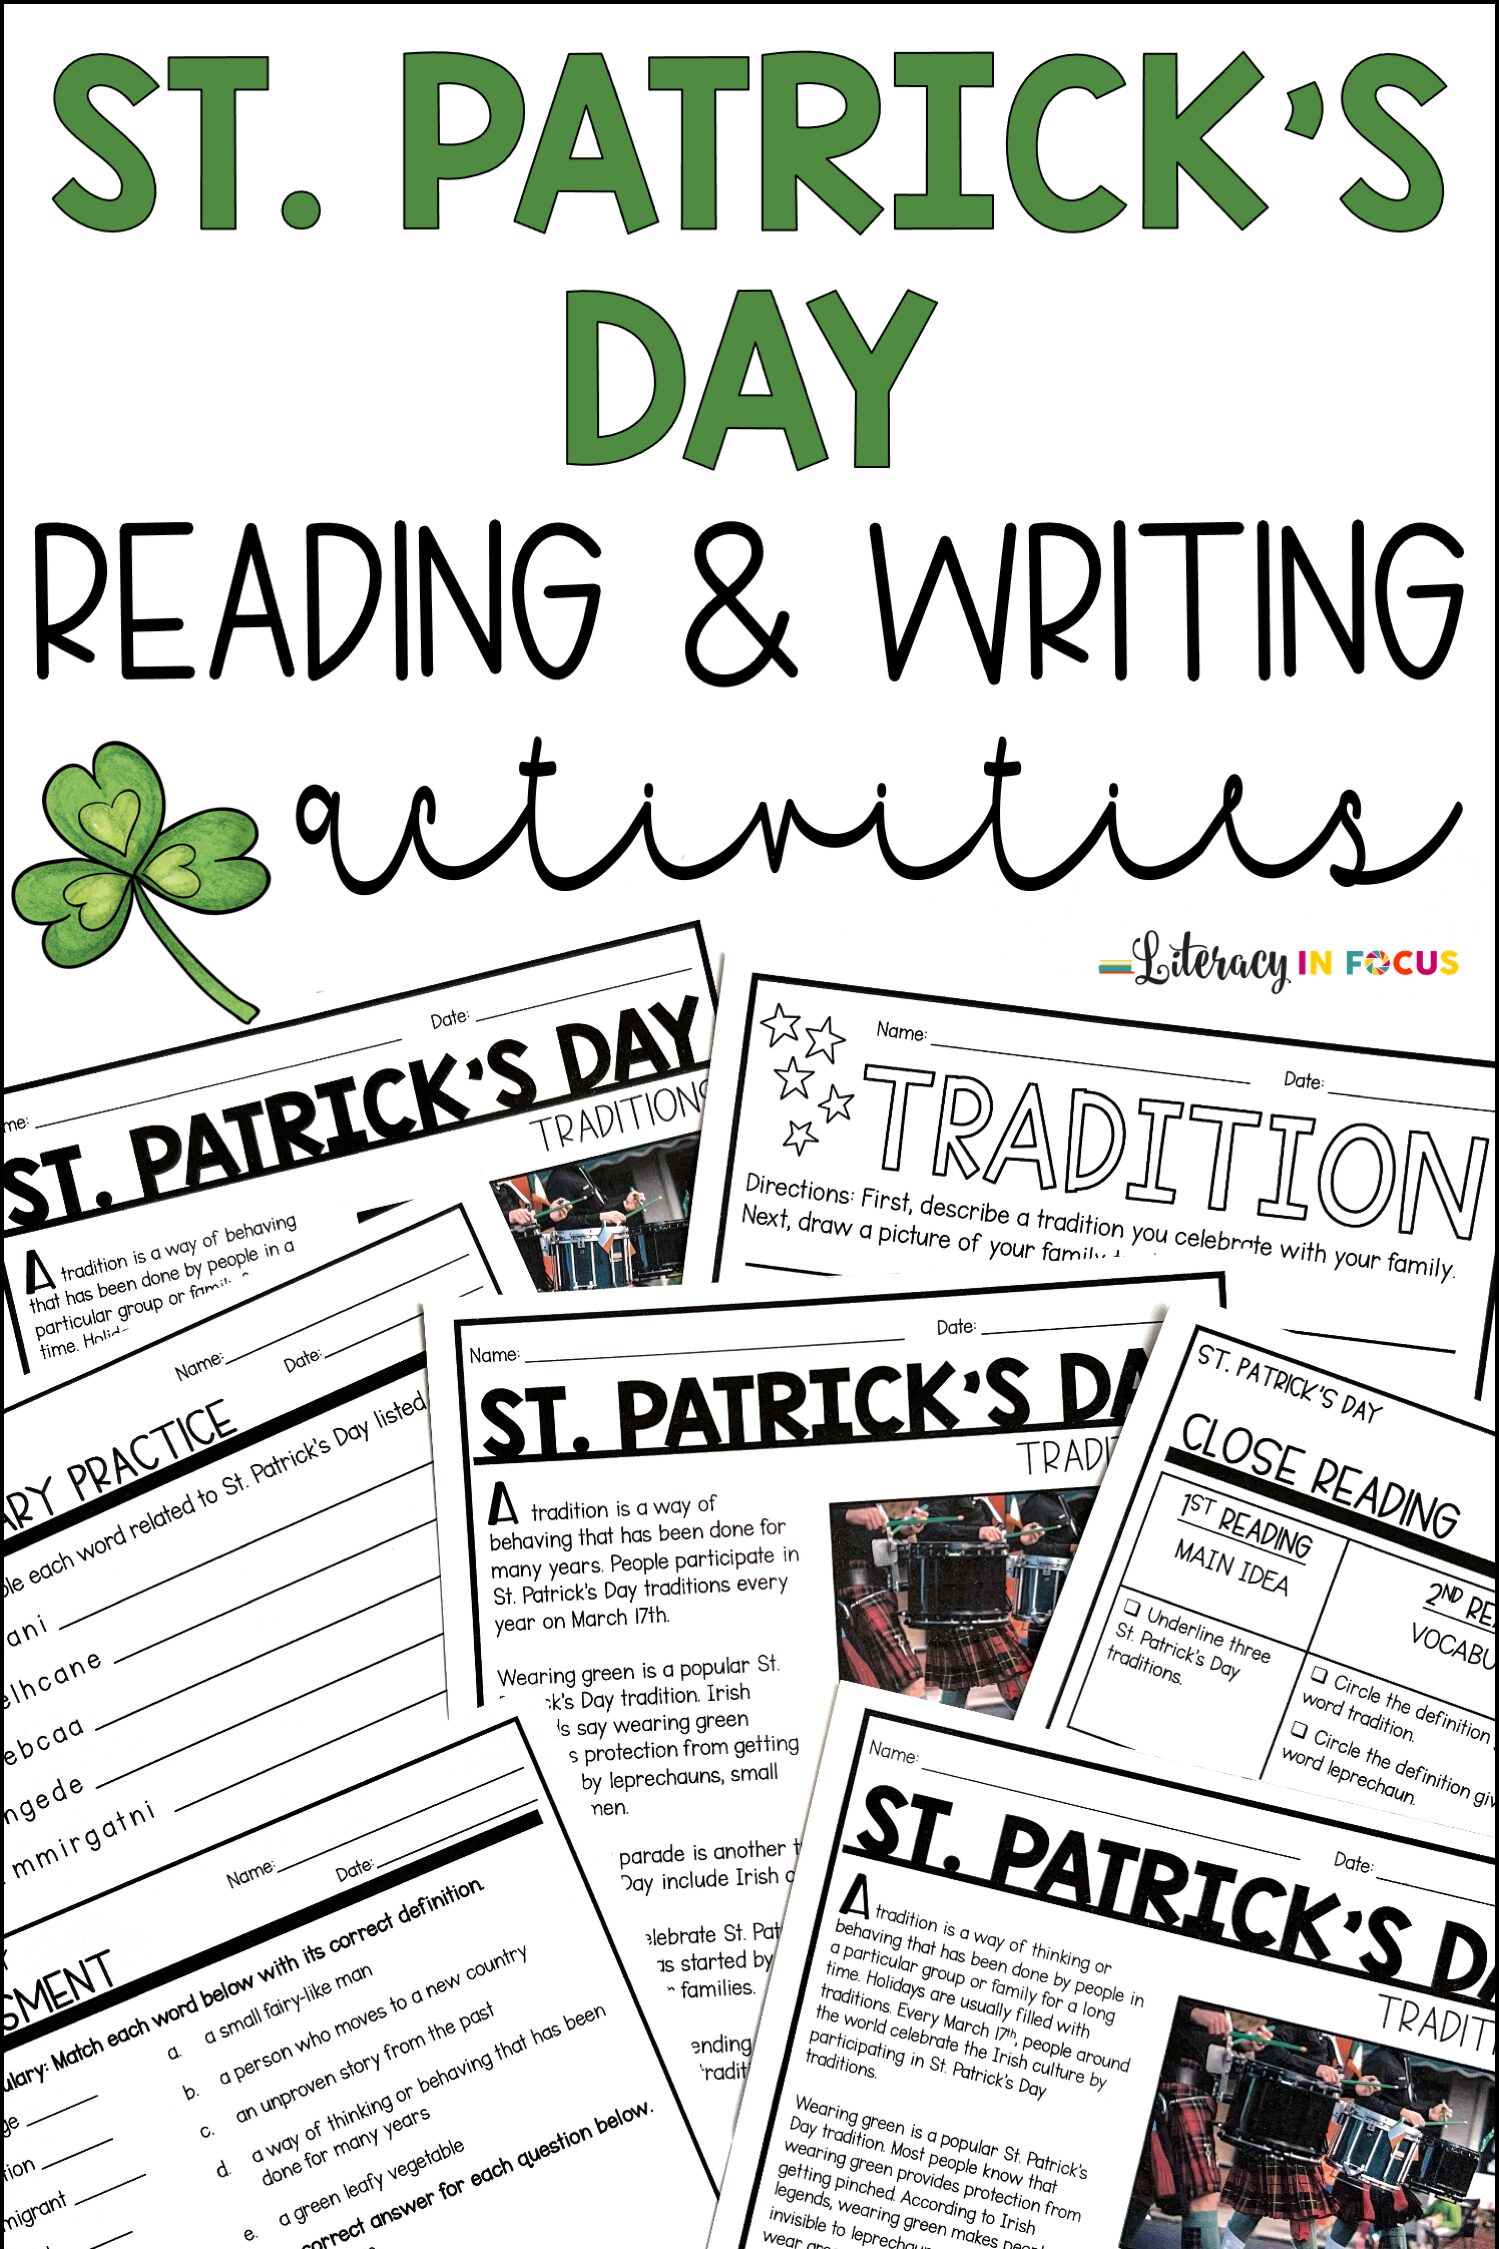 St Patricks Day Reading and Writing Activities